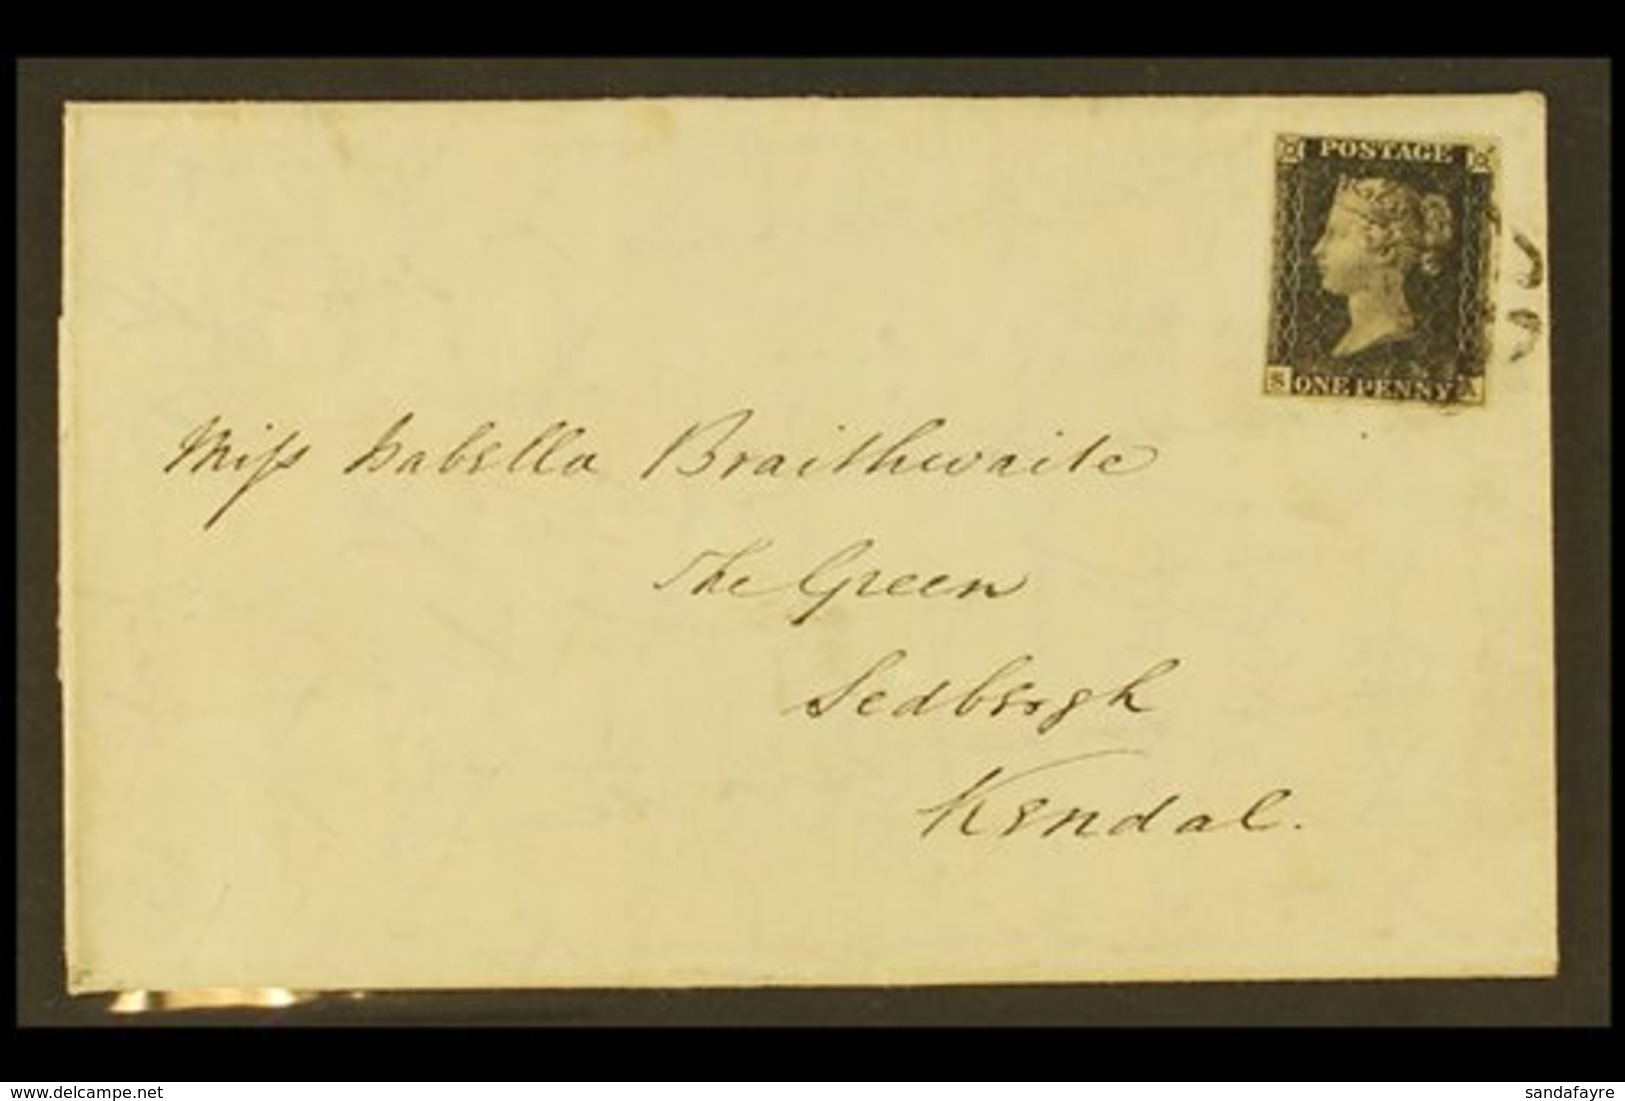 1840 1d Black 'SA' Plate 5 With 4 Neat Margins, Tied Black MC Cancellation Which Leaves The Profile Clear To An 1841 (7  - Non Classés